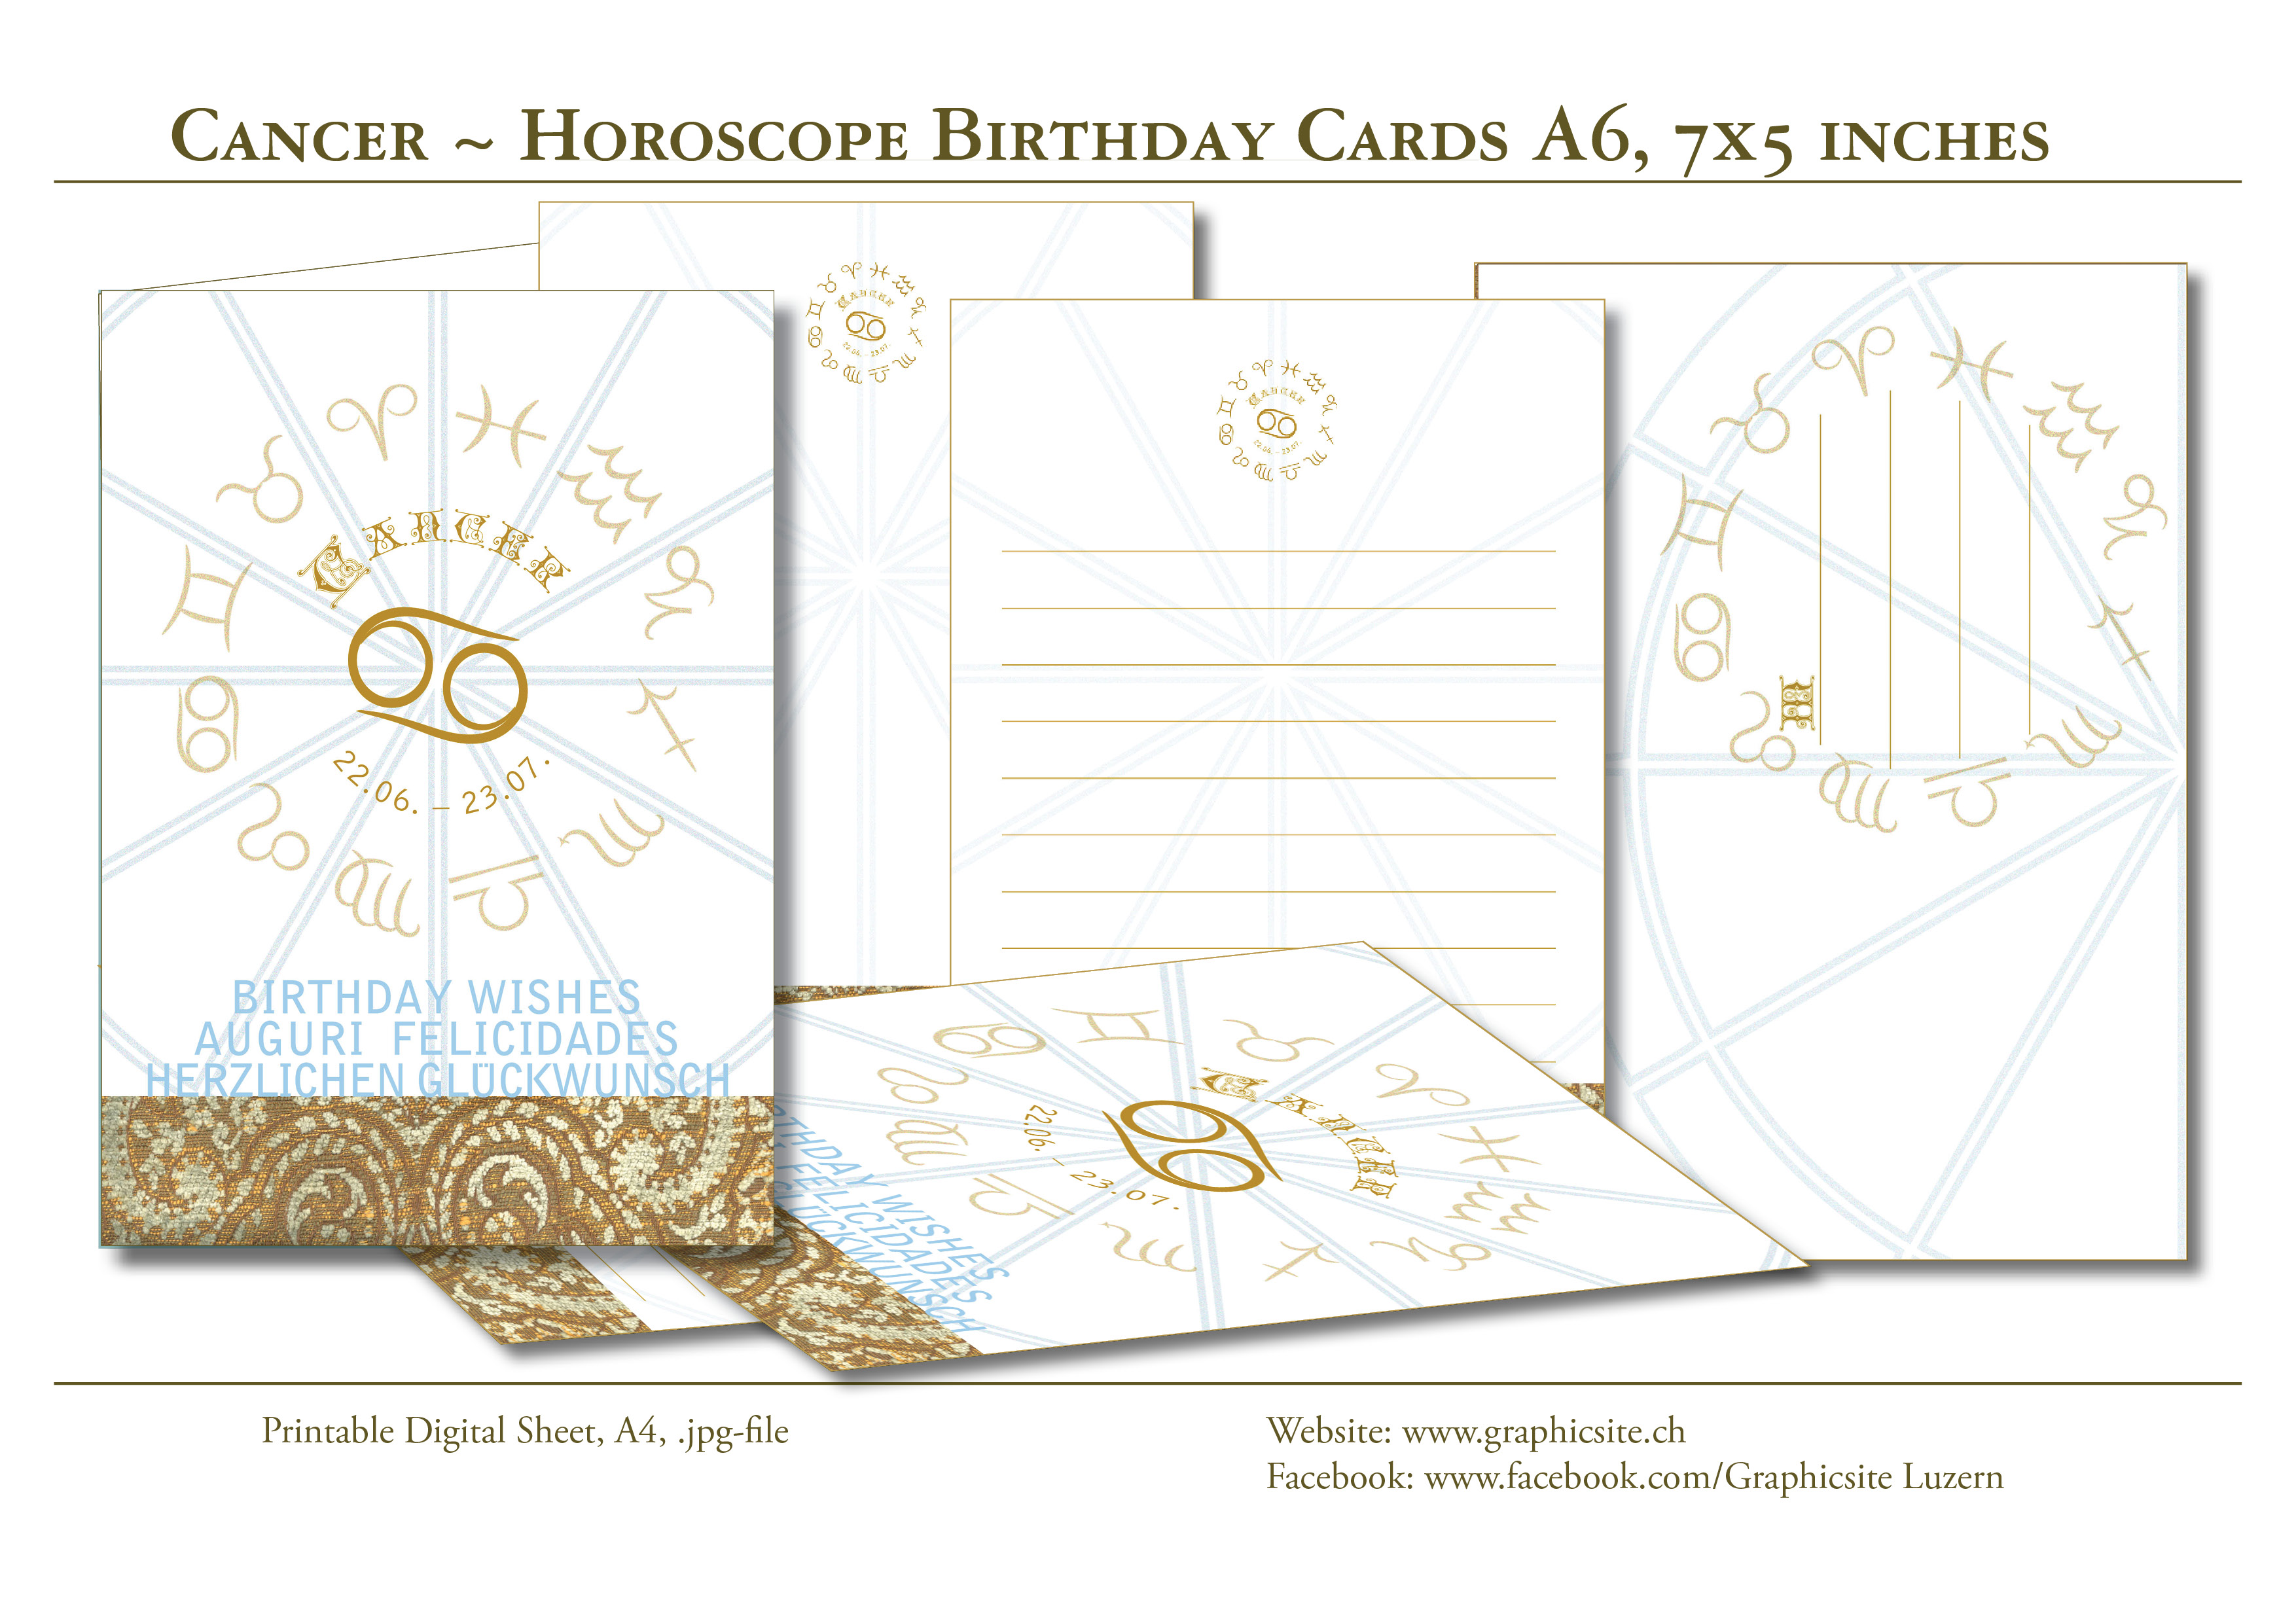 Printable Digital Sheets - Birthday Card Collection - Horoscope - Zodiac - Cancer A6 - GraphicDesign, Luzern